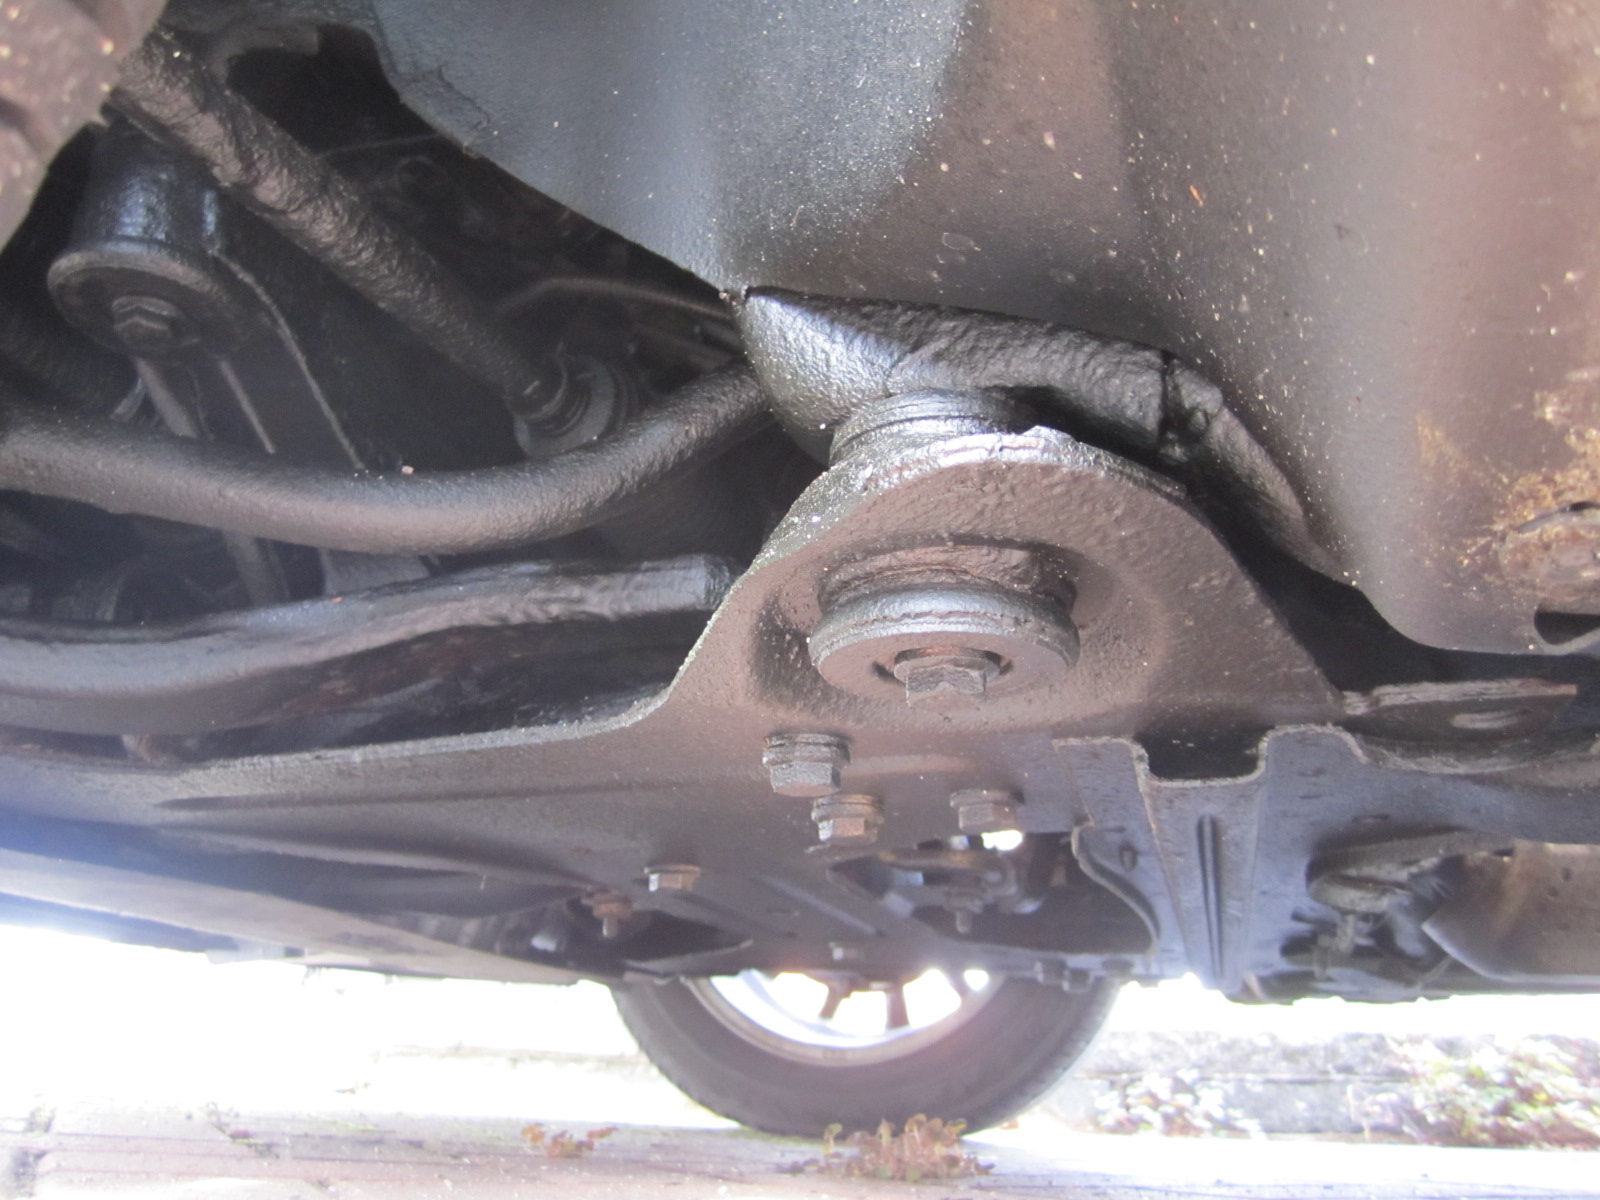 close up image of rear axle and suspension on vehicle